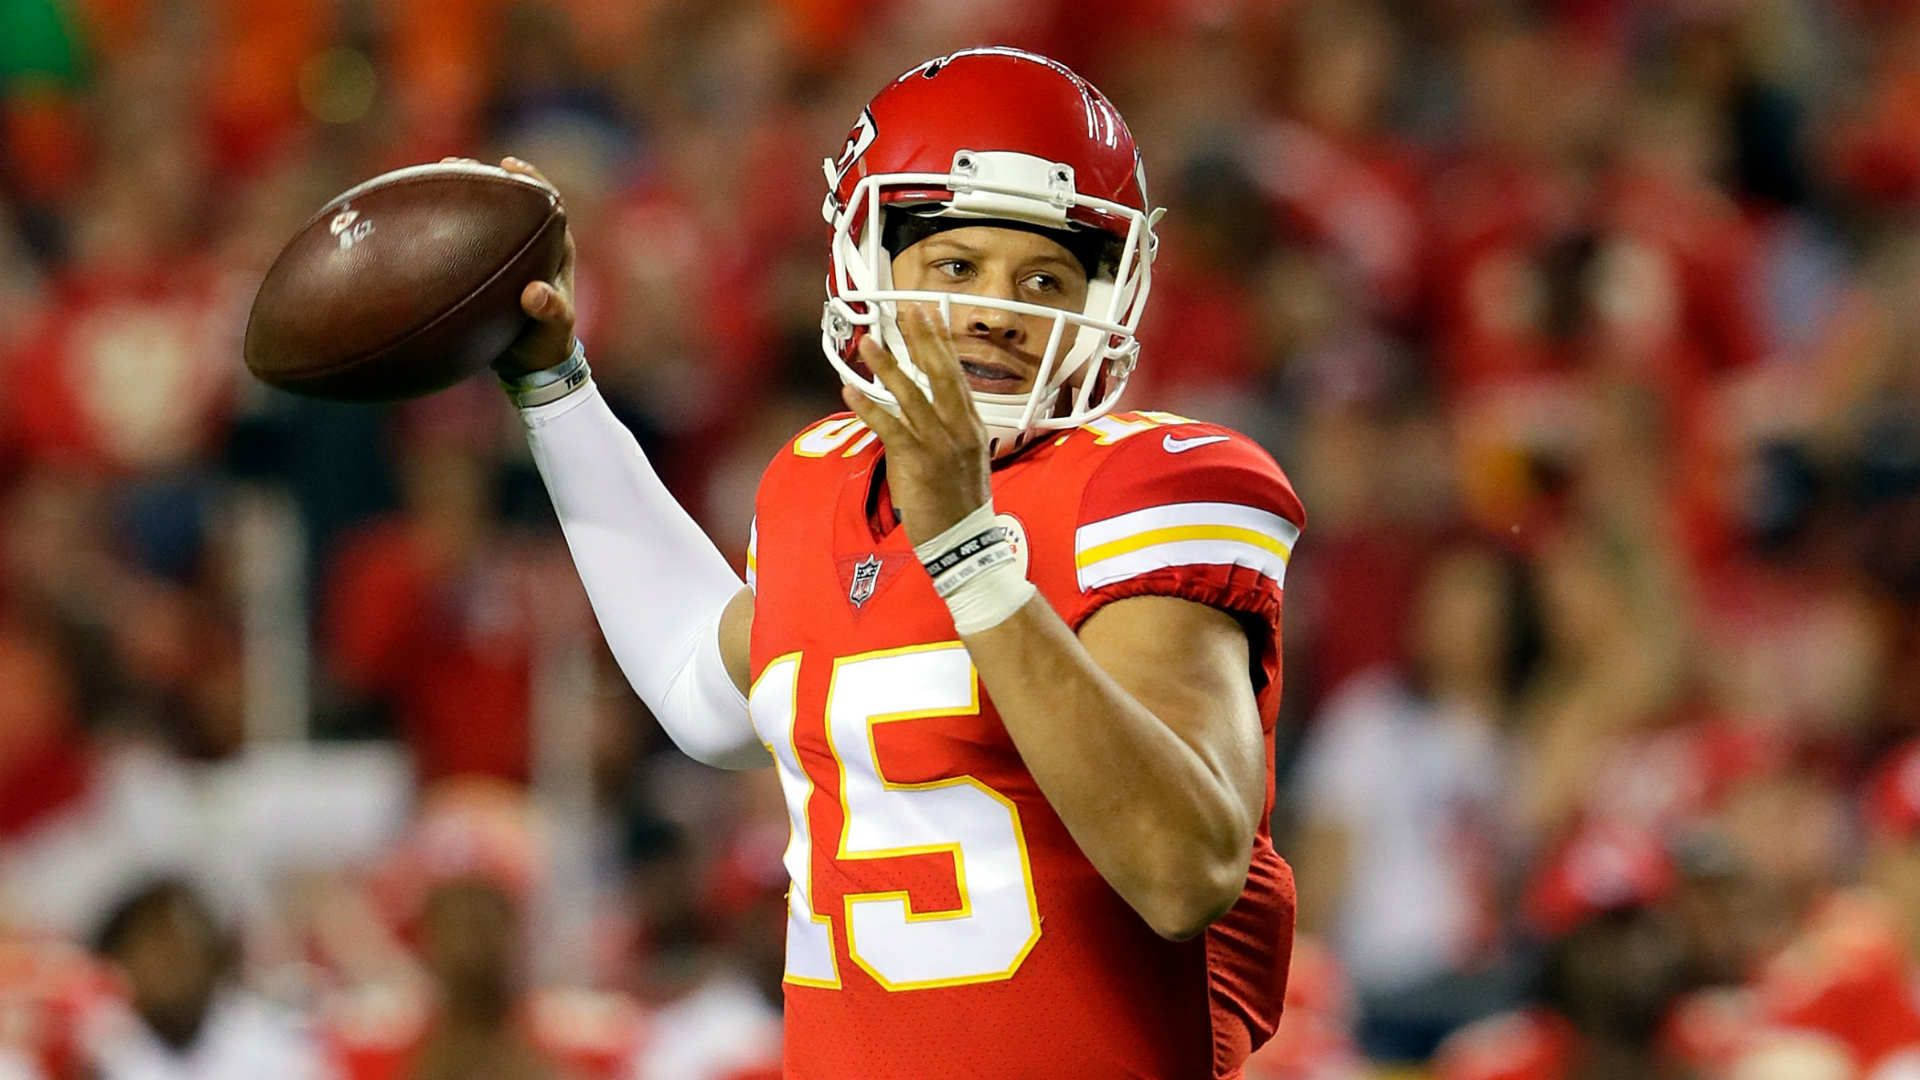 "Superstar quarterback Patrick Mahomes throws for the Chiefs" Wallpaper